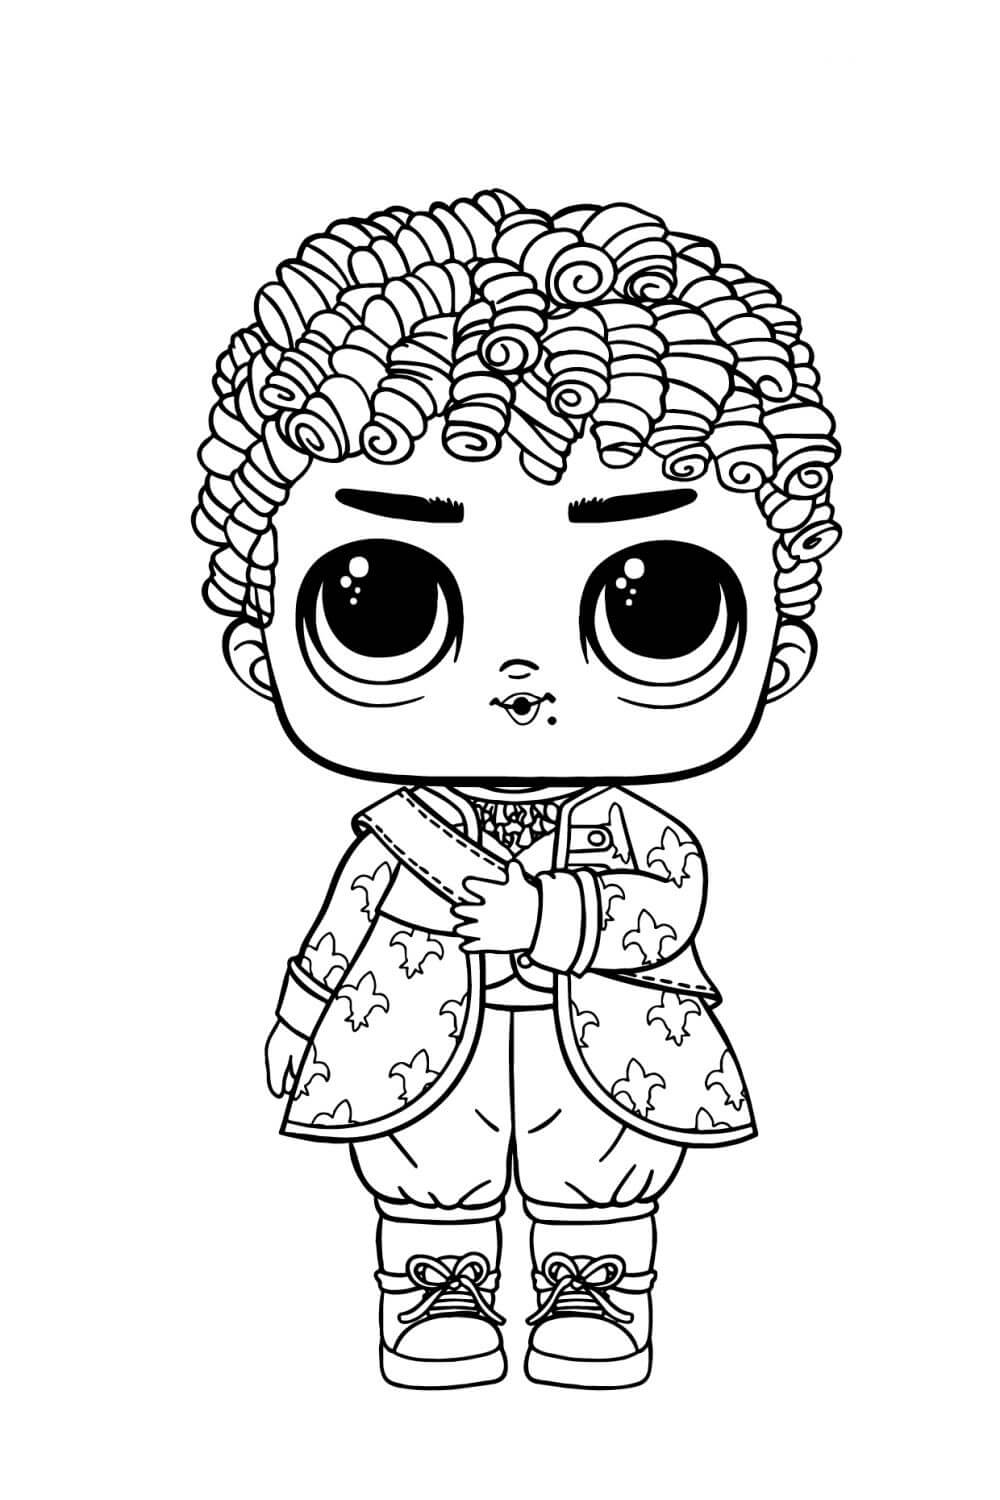 Your Majesty Lol Boys Coloring Page Free Printable Coloring Pages For